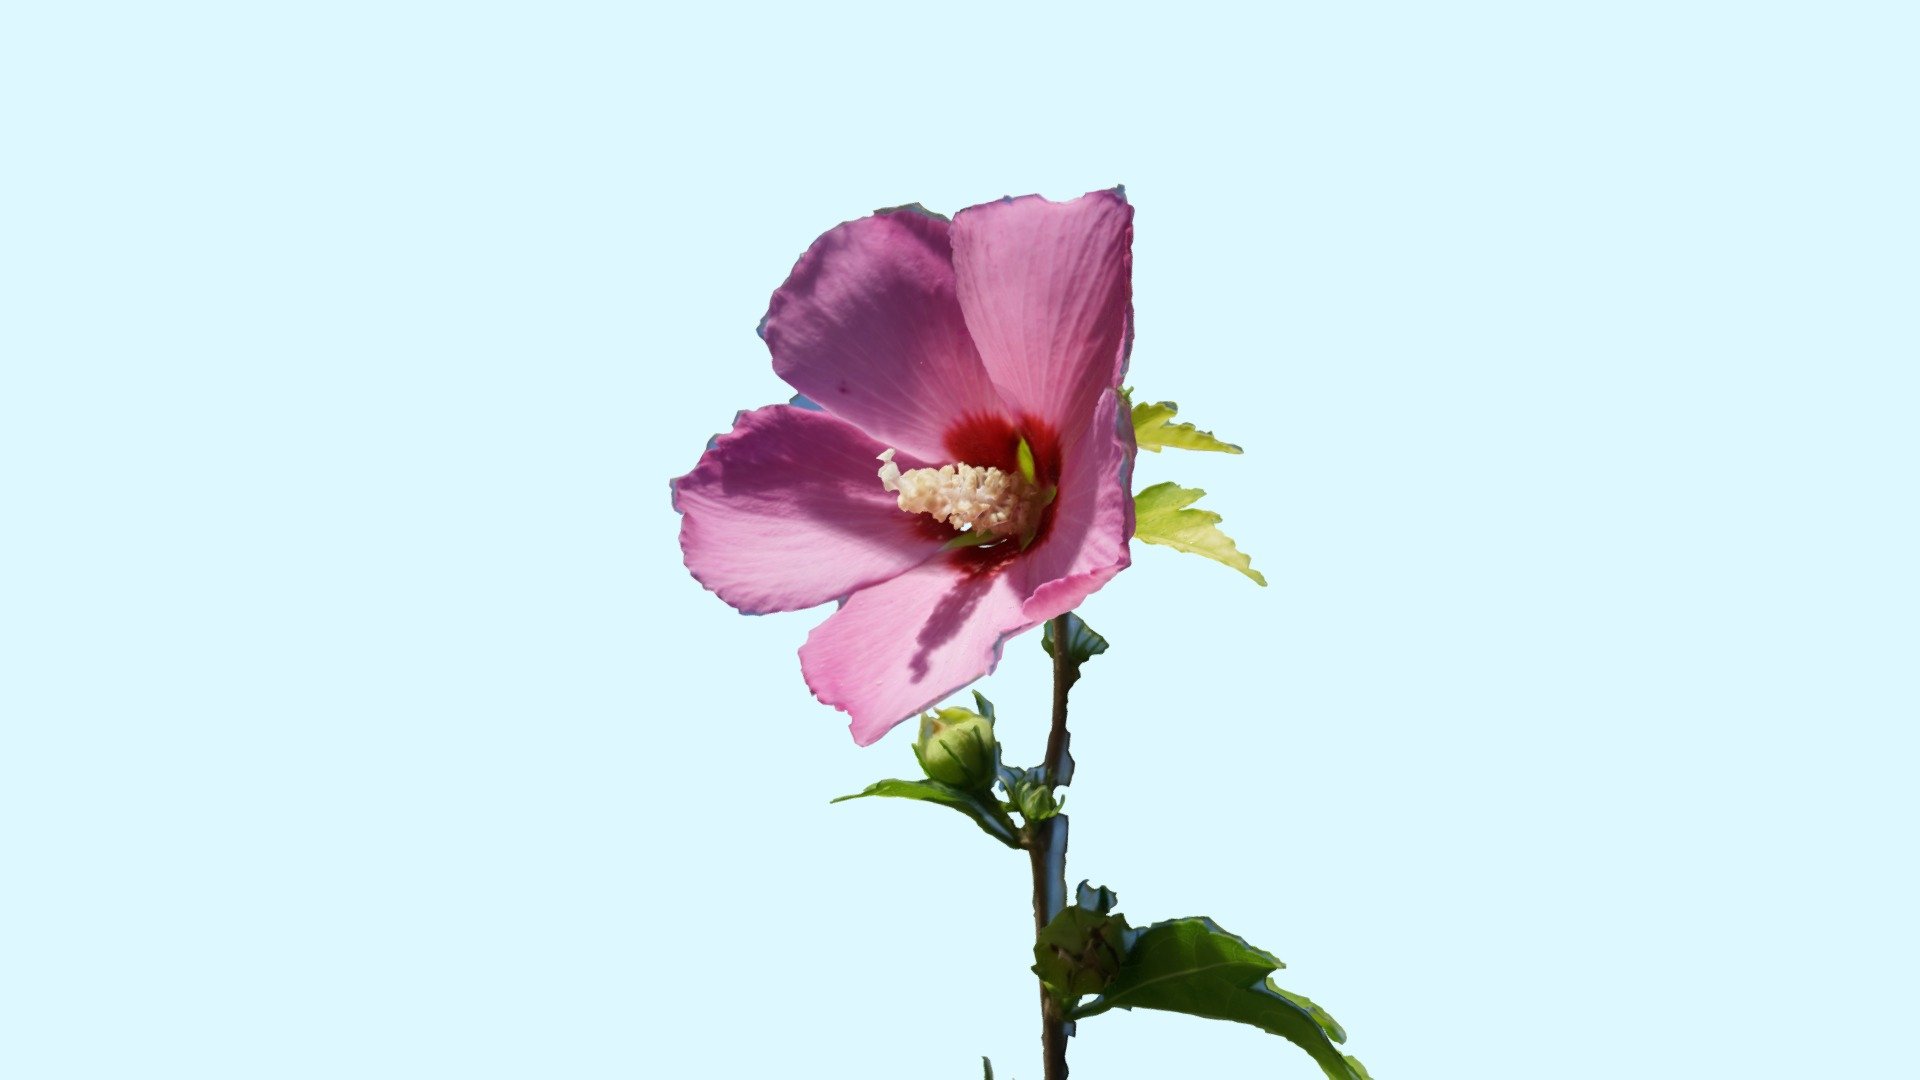 If you buy this model you will get the high poly 1 million polygons version with an 8K texture plus the lightweight model for AR or real-time with a 4K texture.

Hibiscus syriacus is a species of flowering plant in the mallow family, Malvaceae. It is native to south-central and southeast China, but widely introduced elsewhere, including much of Asia.

It was given the epithet syriacus because it had been collected from gardens in Syria.

Common names include the Korean rose (in South Korea), rose of Sharon (especially in North America), Syrian ketmia, shrub althea, rose mallow (in the United Kingdom), and rosa de Sharon (in Brazil).

It is the national flower of South Korea and is mentioned in the South Korean national anthem.

 - Scan of a Korean Rose - Hibiscus Syriacus - Buy Royalty Free 3D model by riccardogiorato 3d model